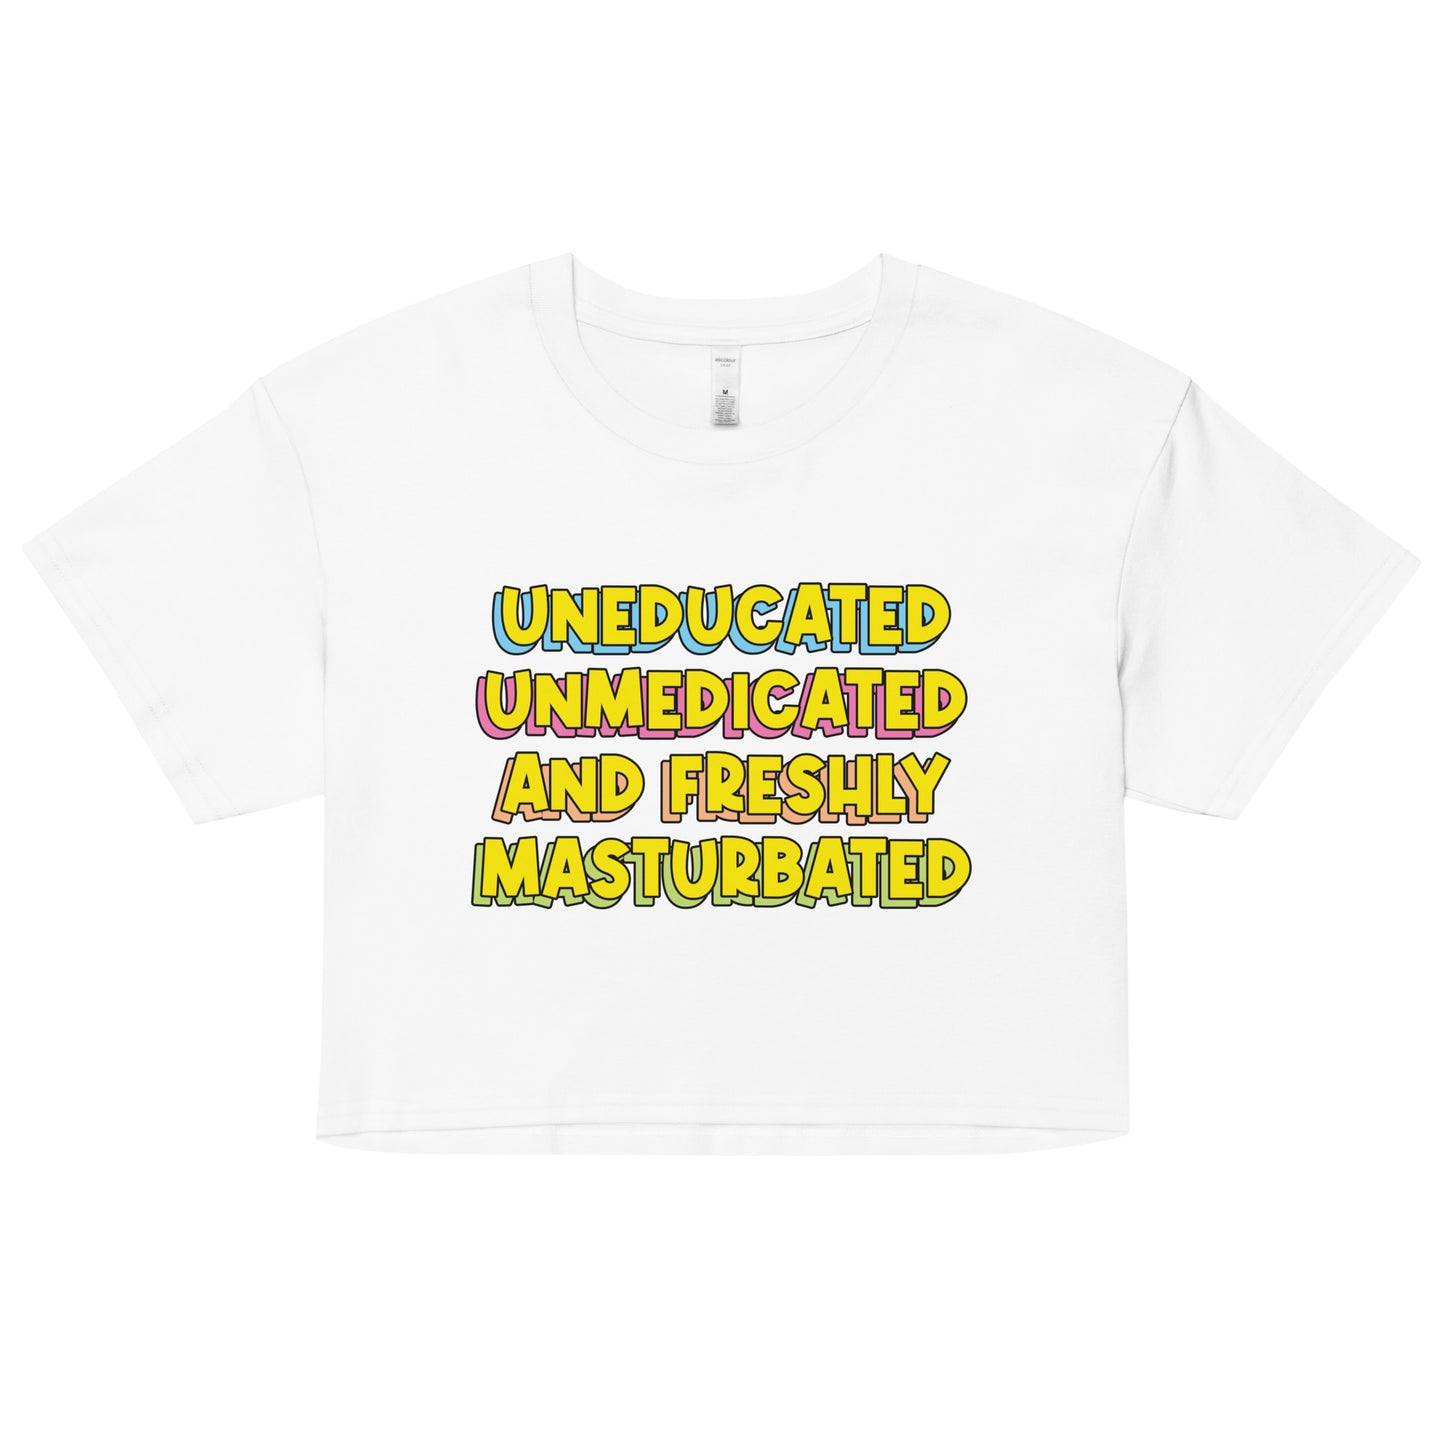 Uneducated Unmedicated and Freshly Masturbated crop top